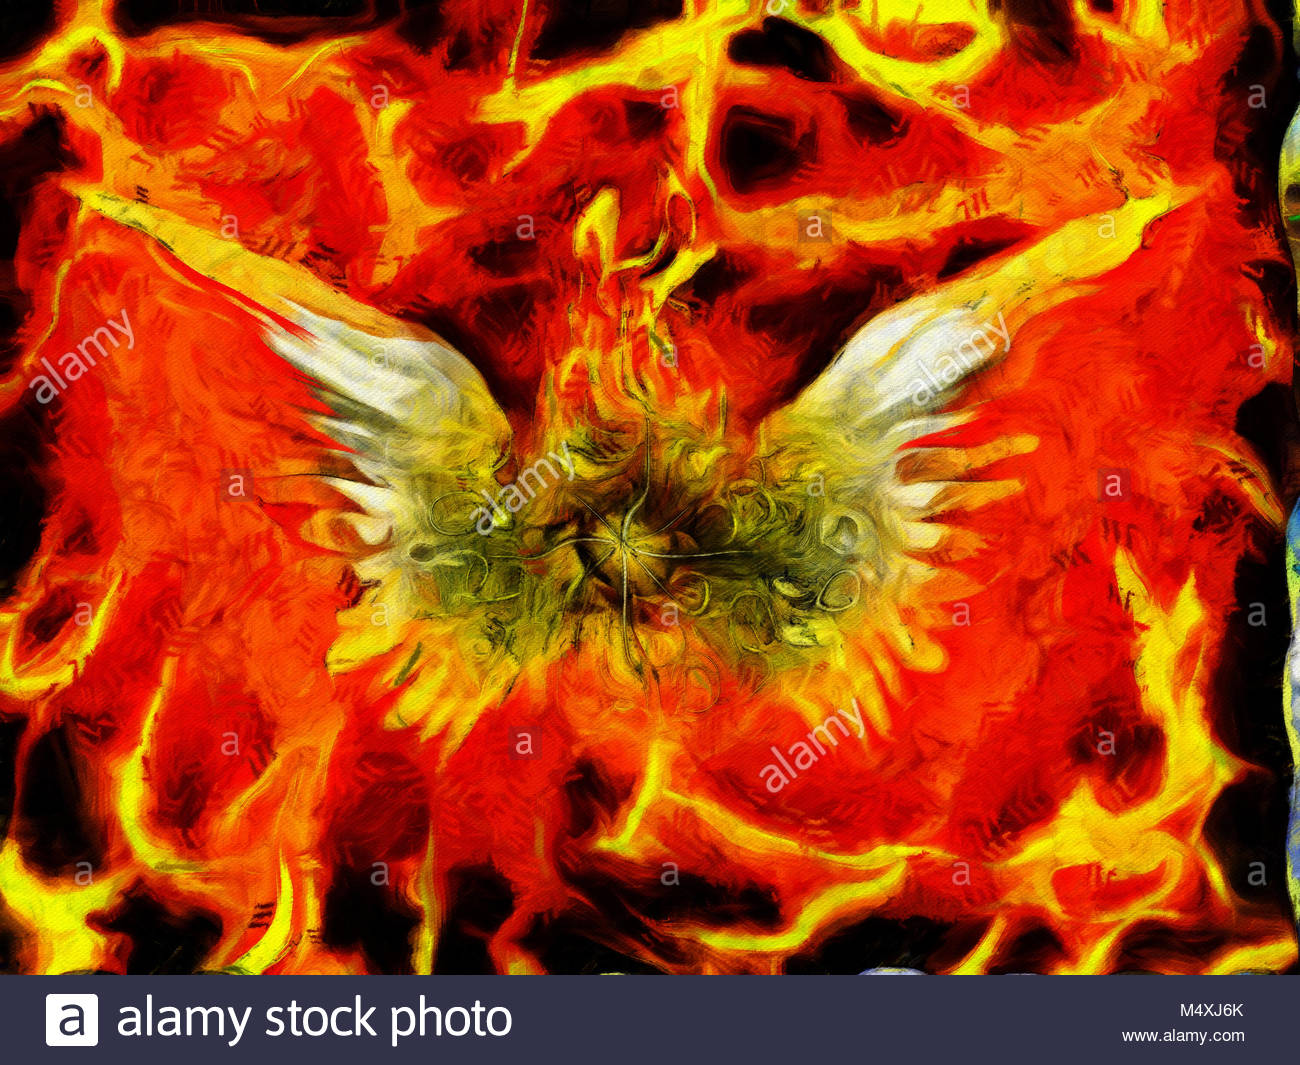 Surreal Painting Burning Eye With Wings Flaming Background Stock